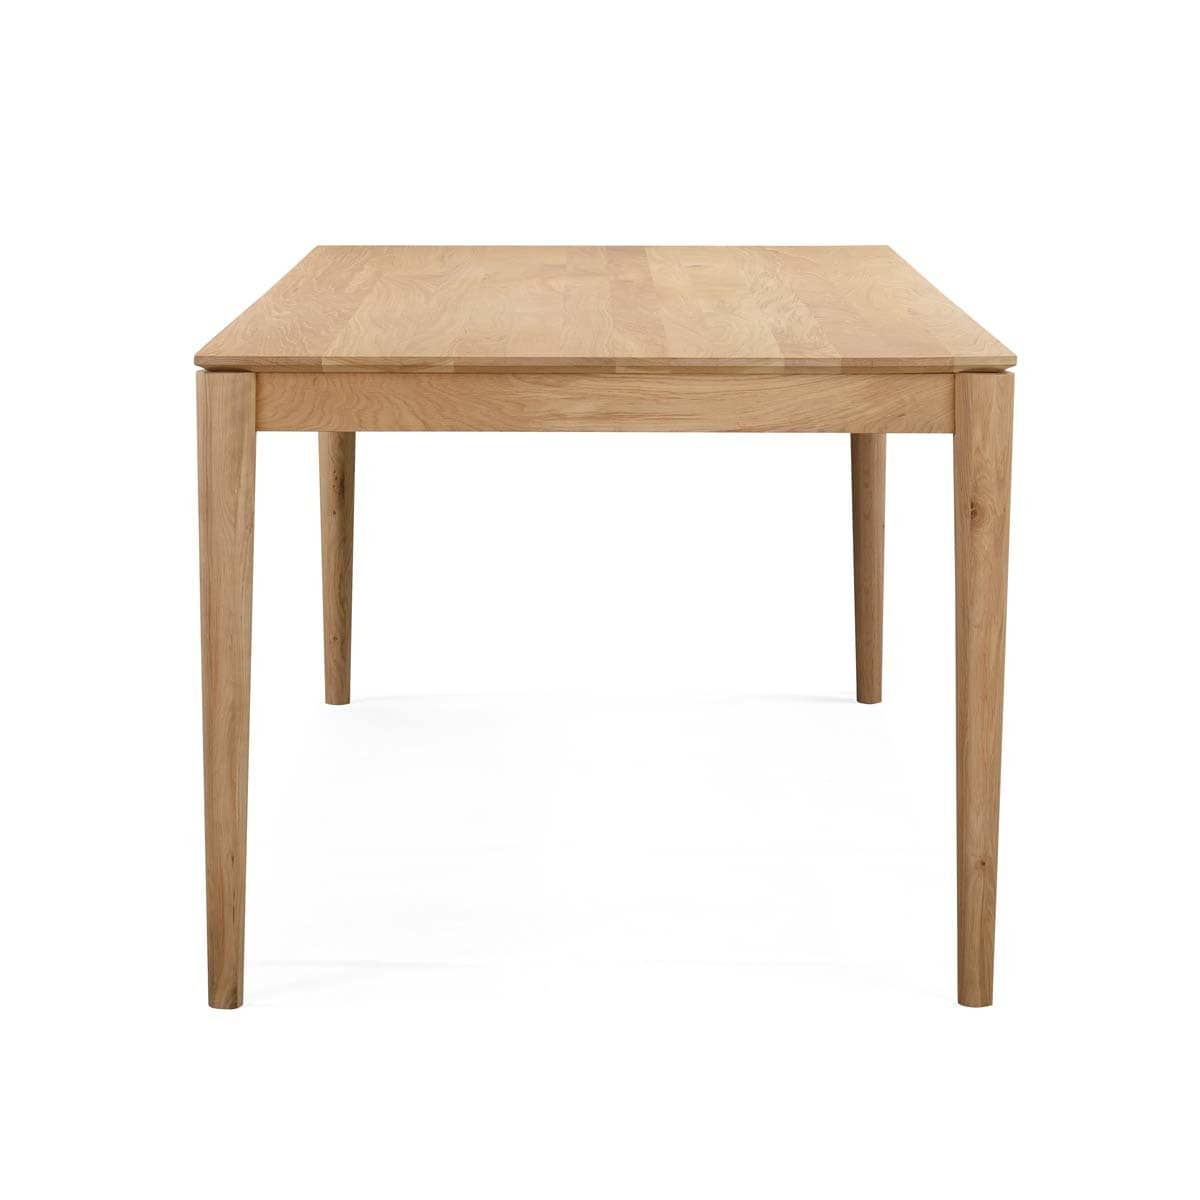 Gather Dining Table - 200cm